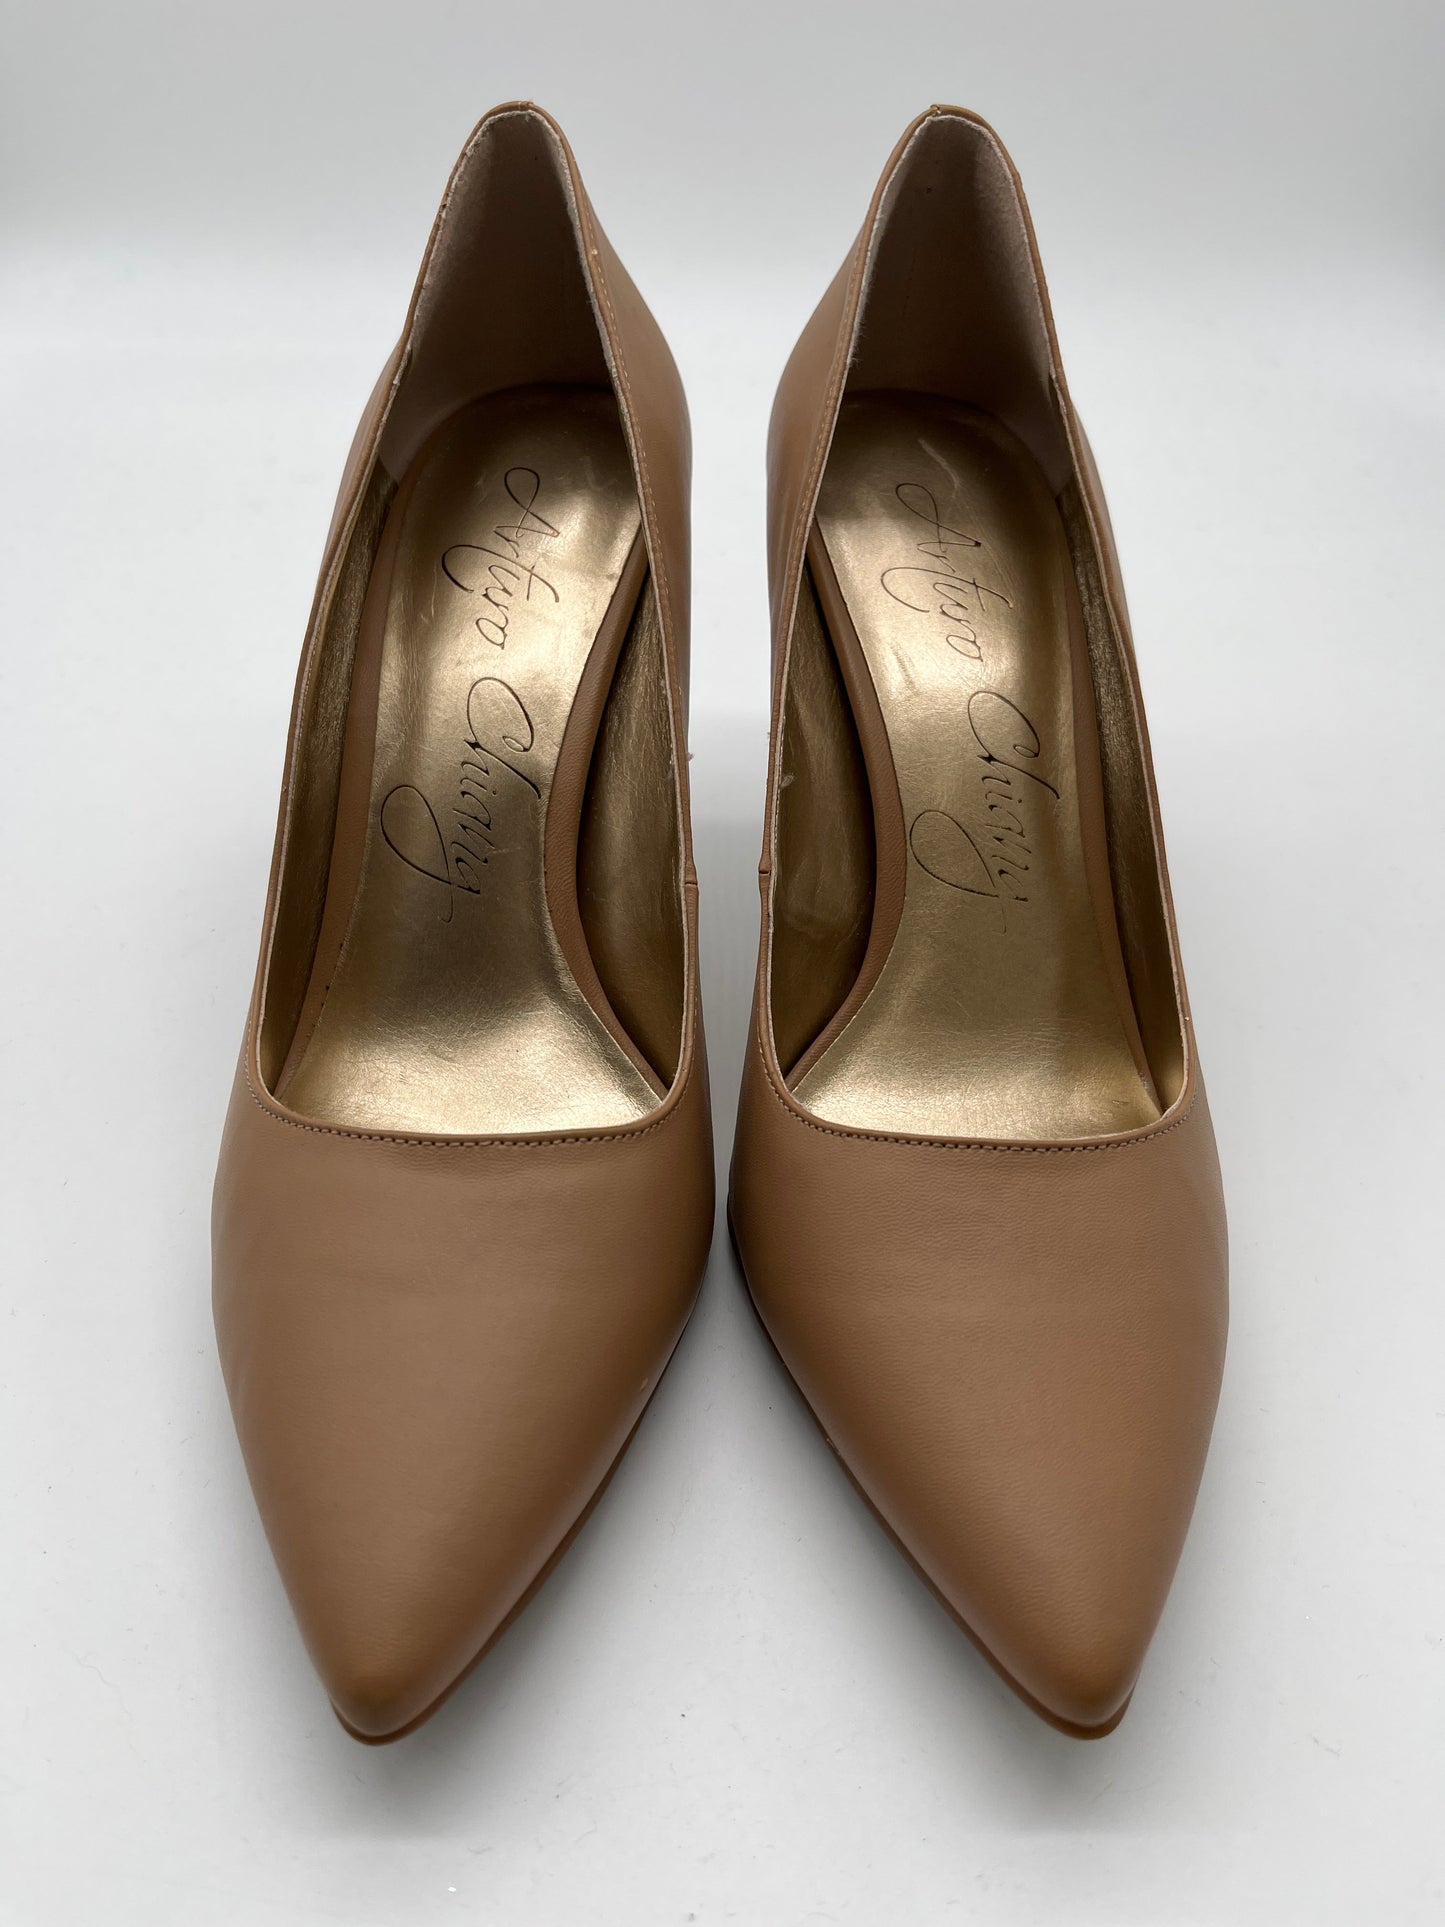 Brown Shoes Heels Stiletto Arturo Chiang, Size 7.5